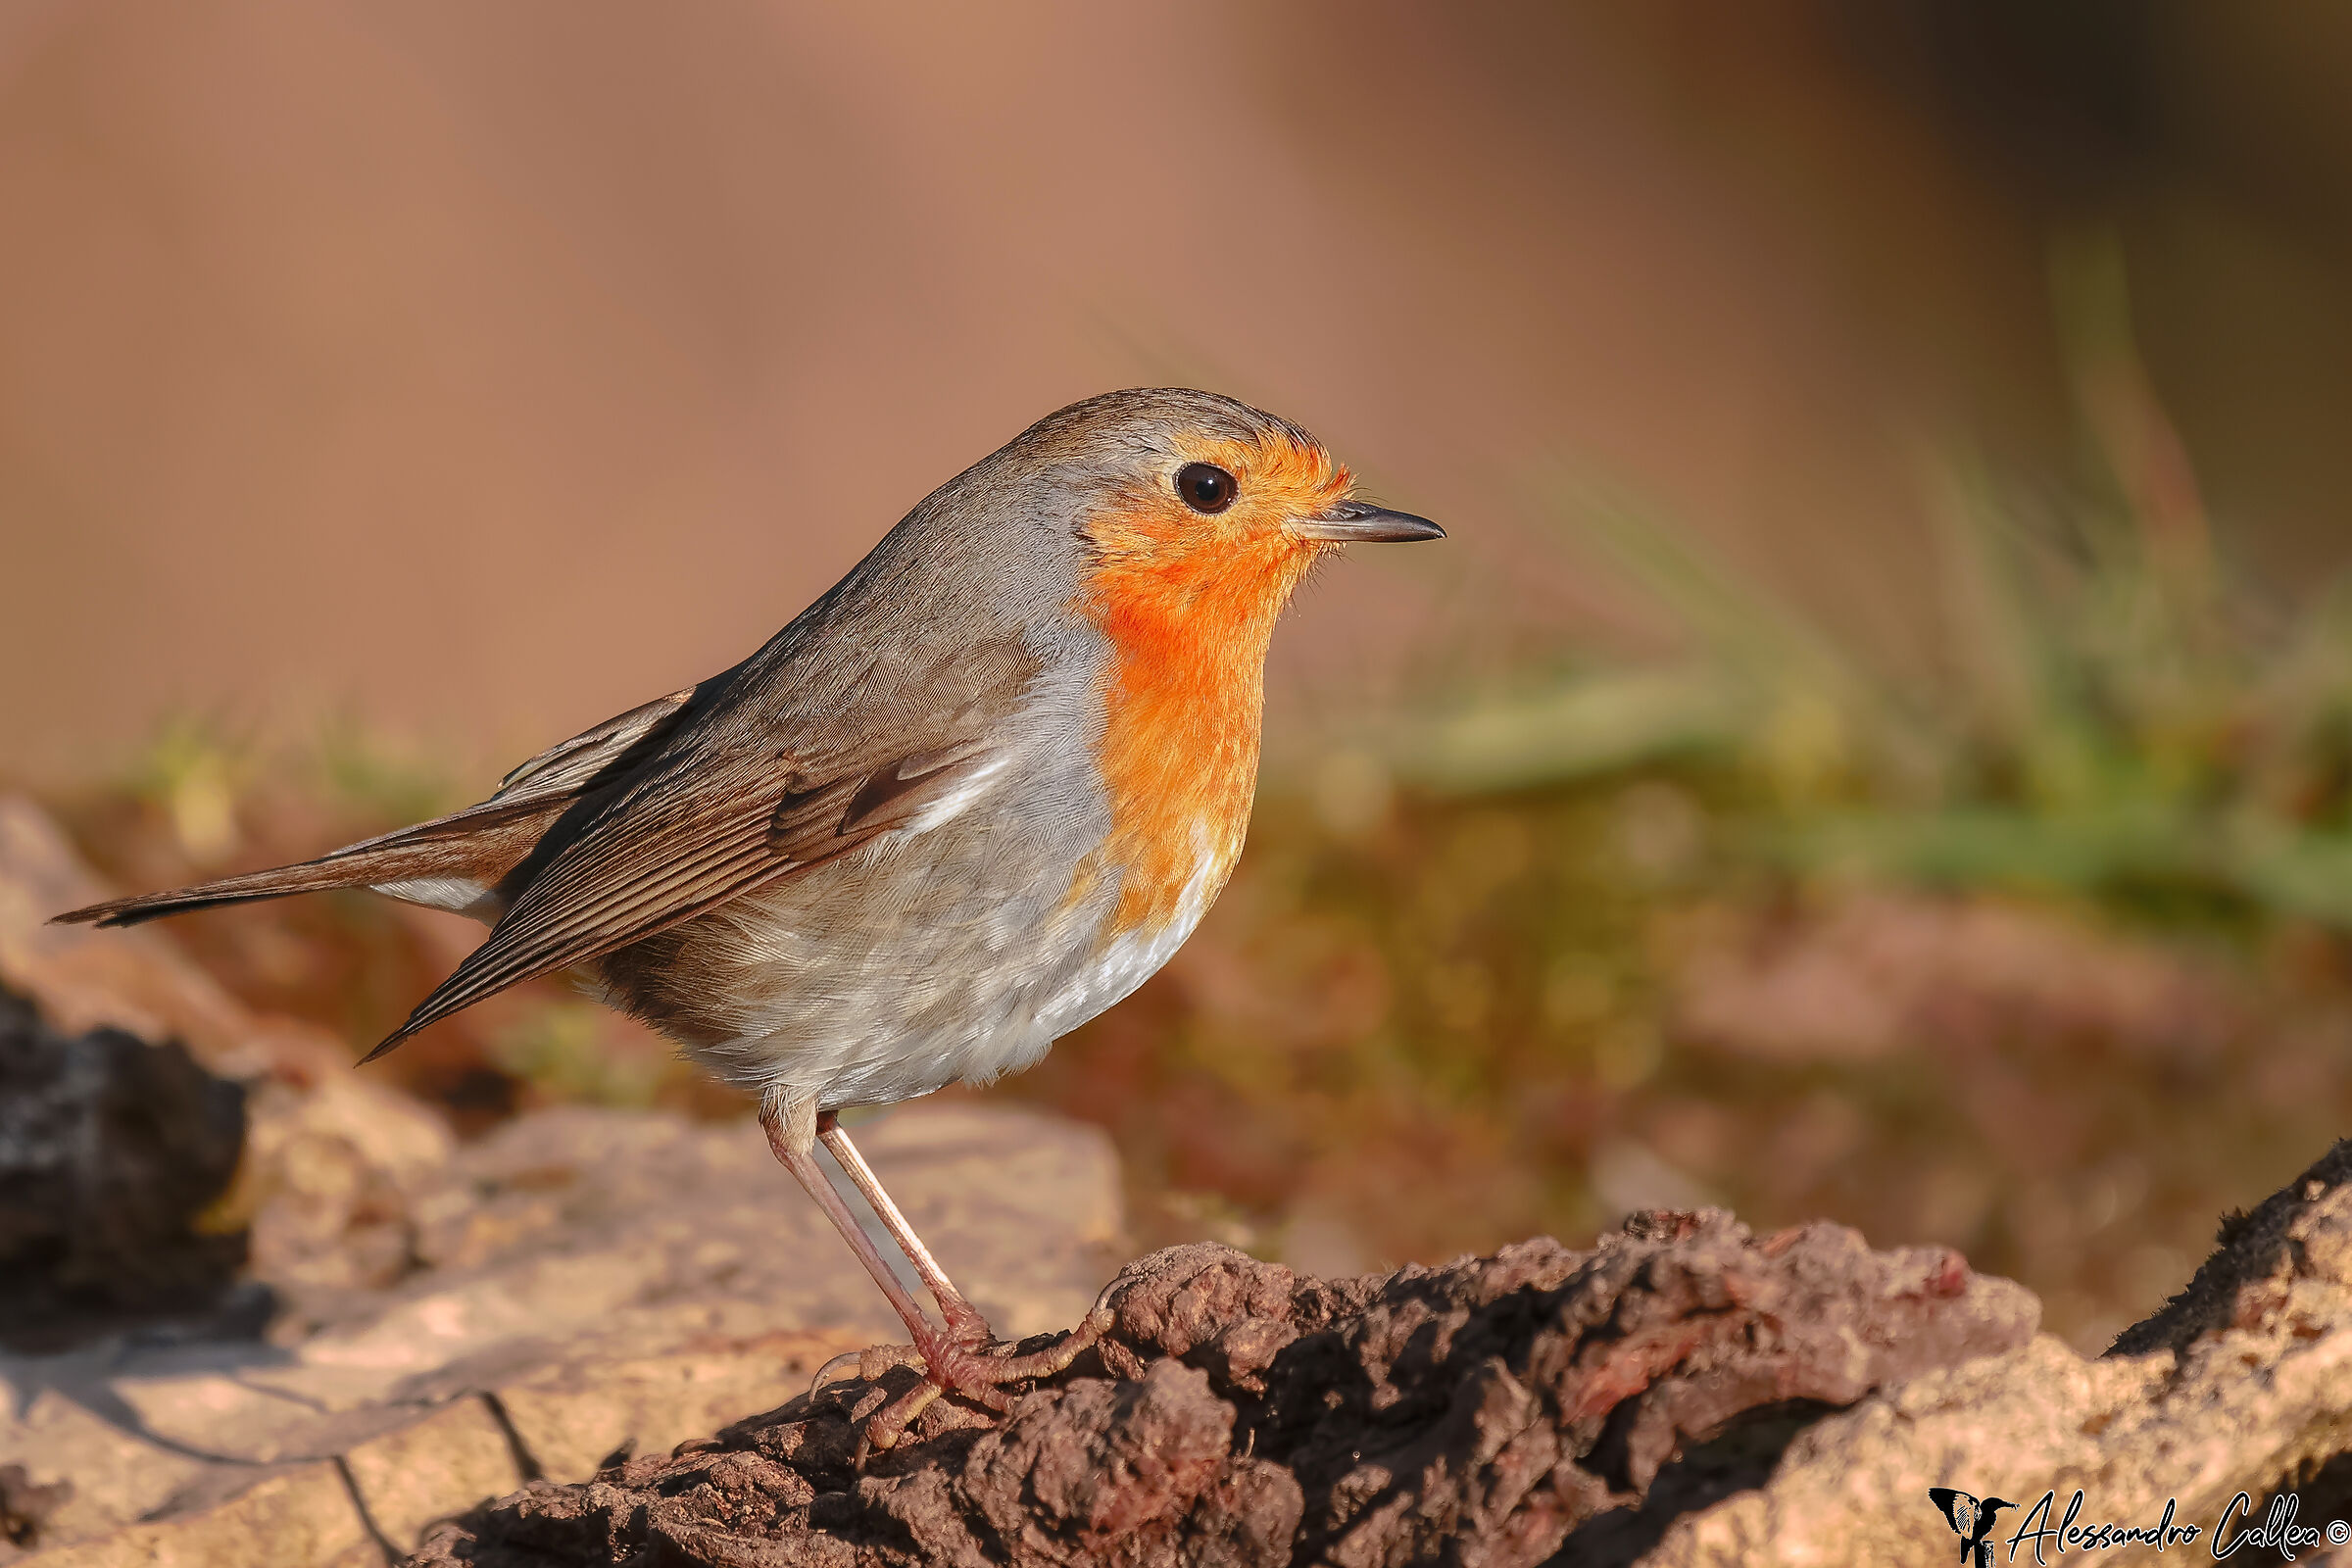 Red robin enjoying the first rays of sunshine......